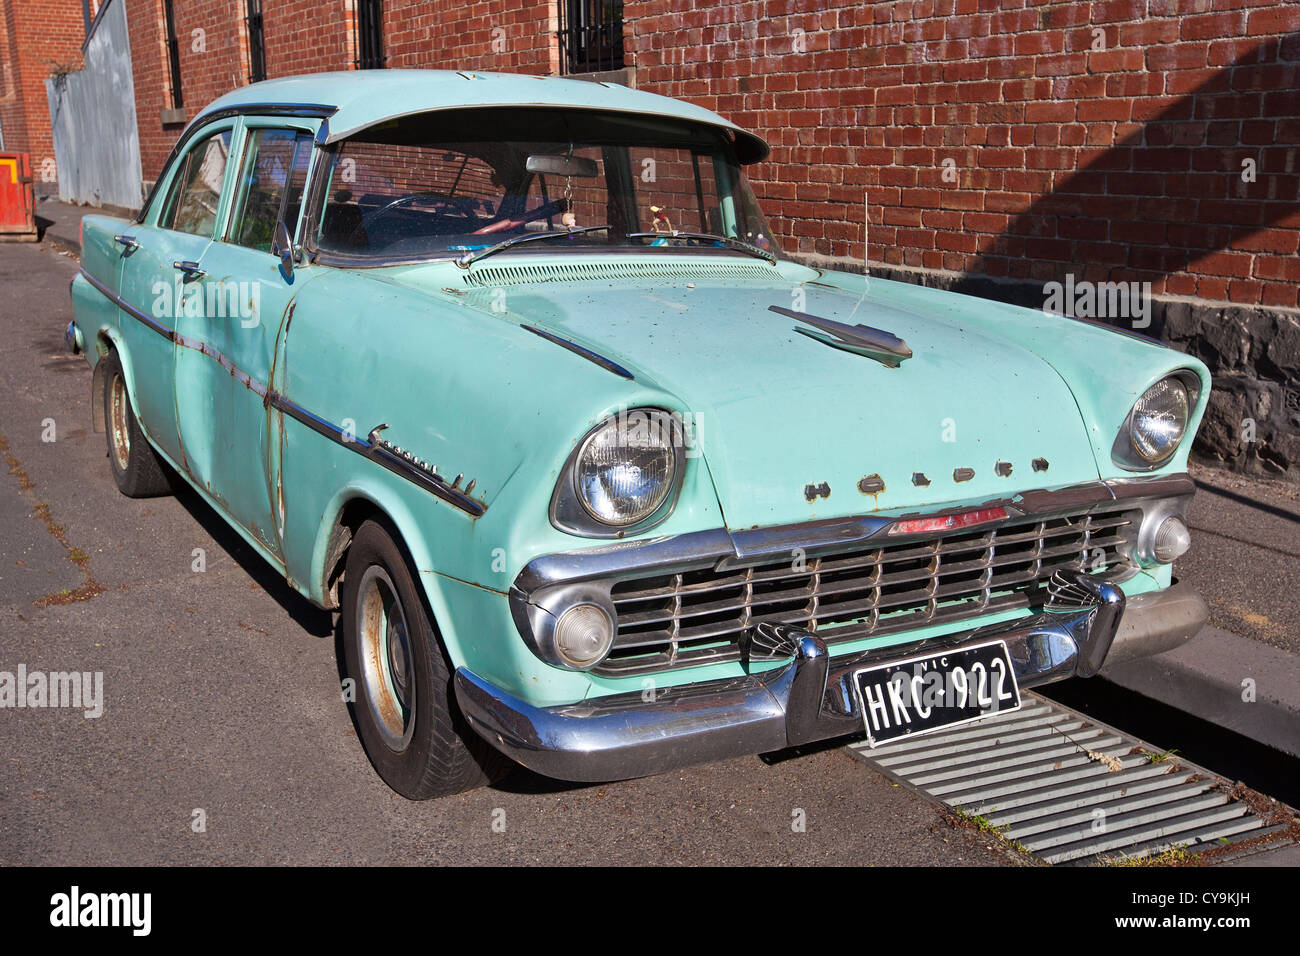 classic holden Australian car in Melbourne Victoria Australia rusty and old parked on the street Stock Photo